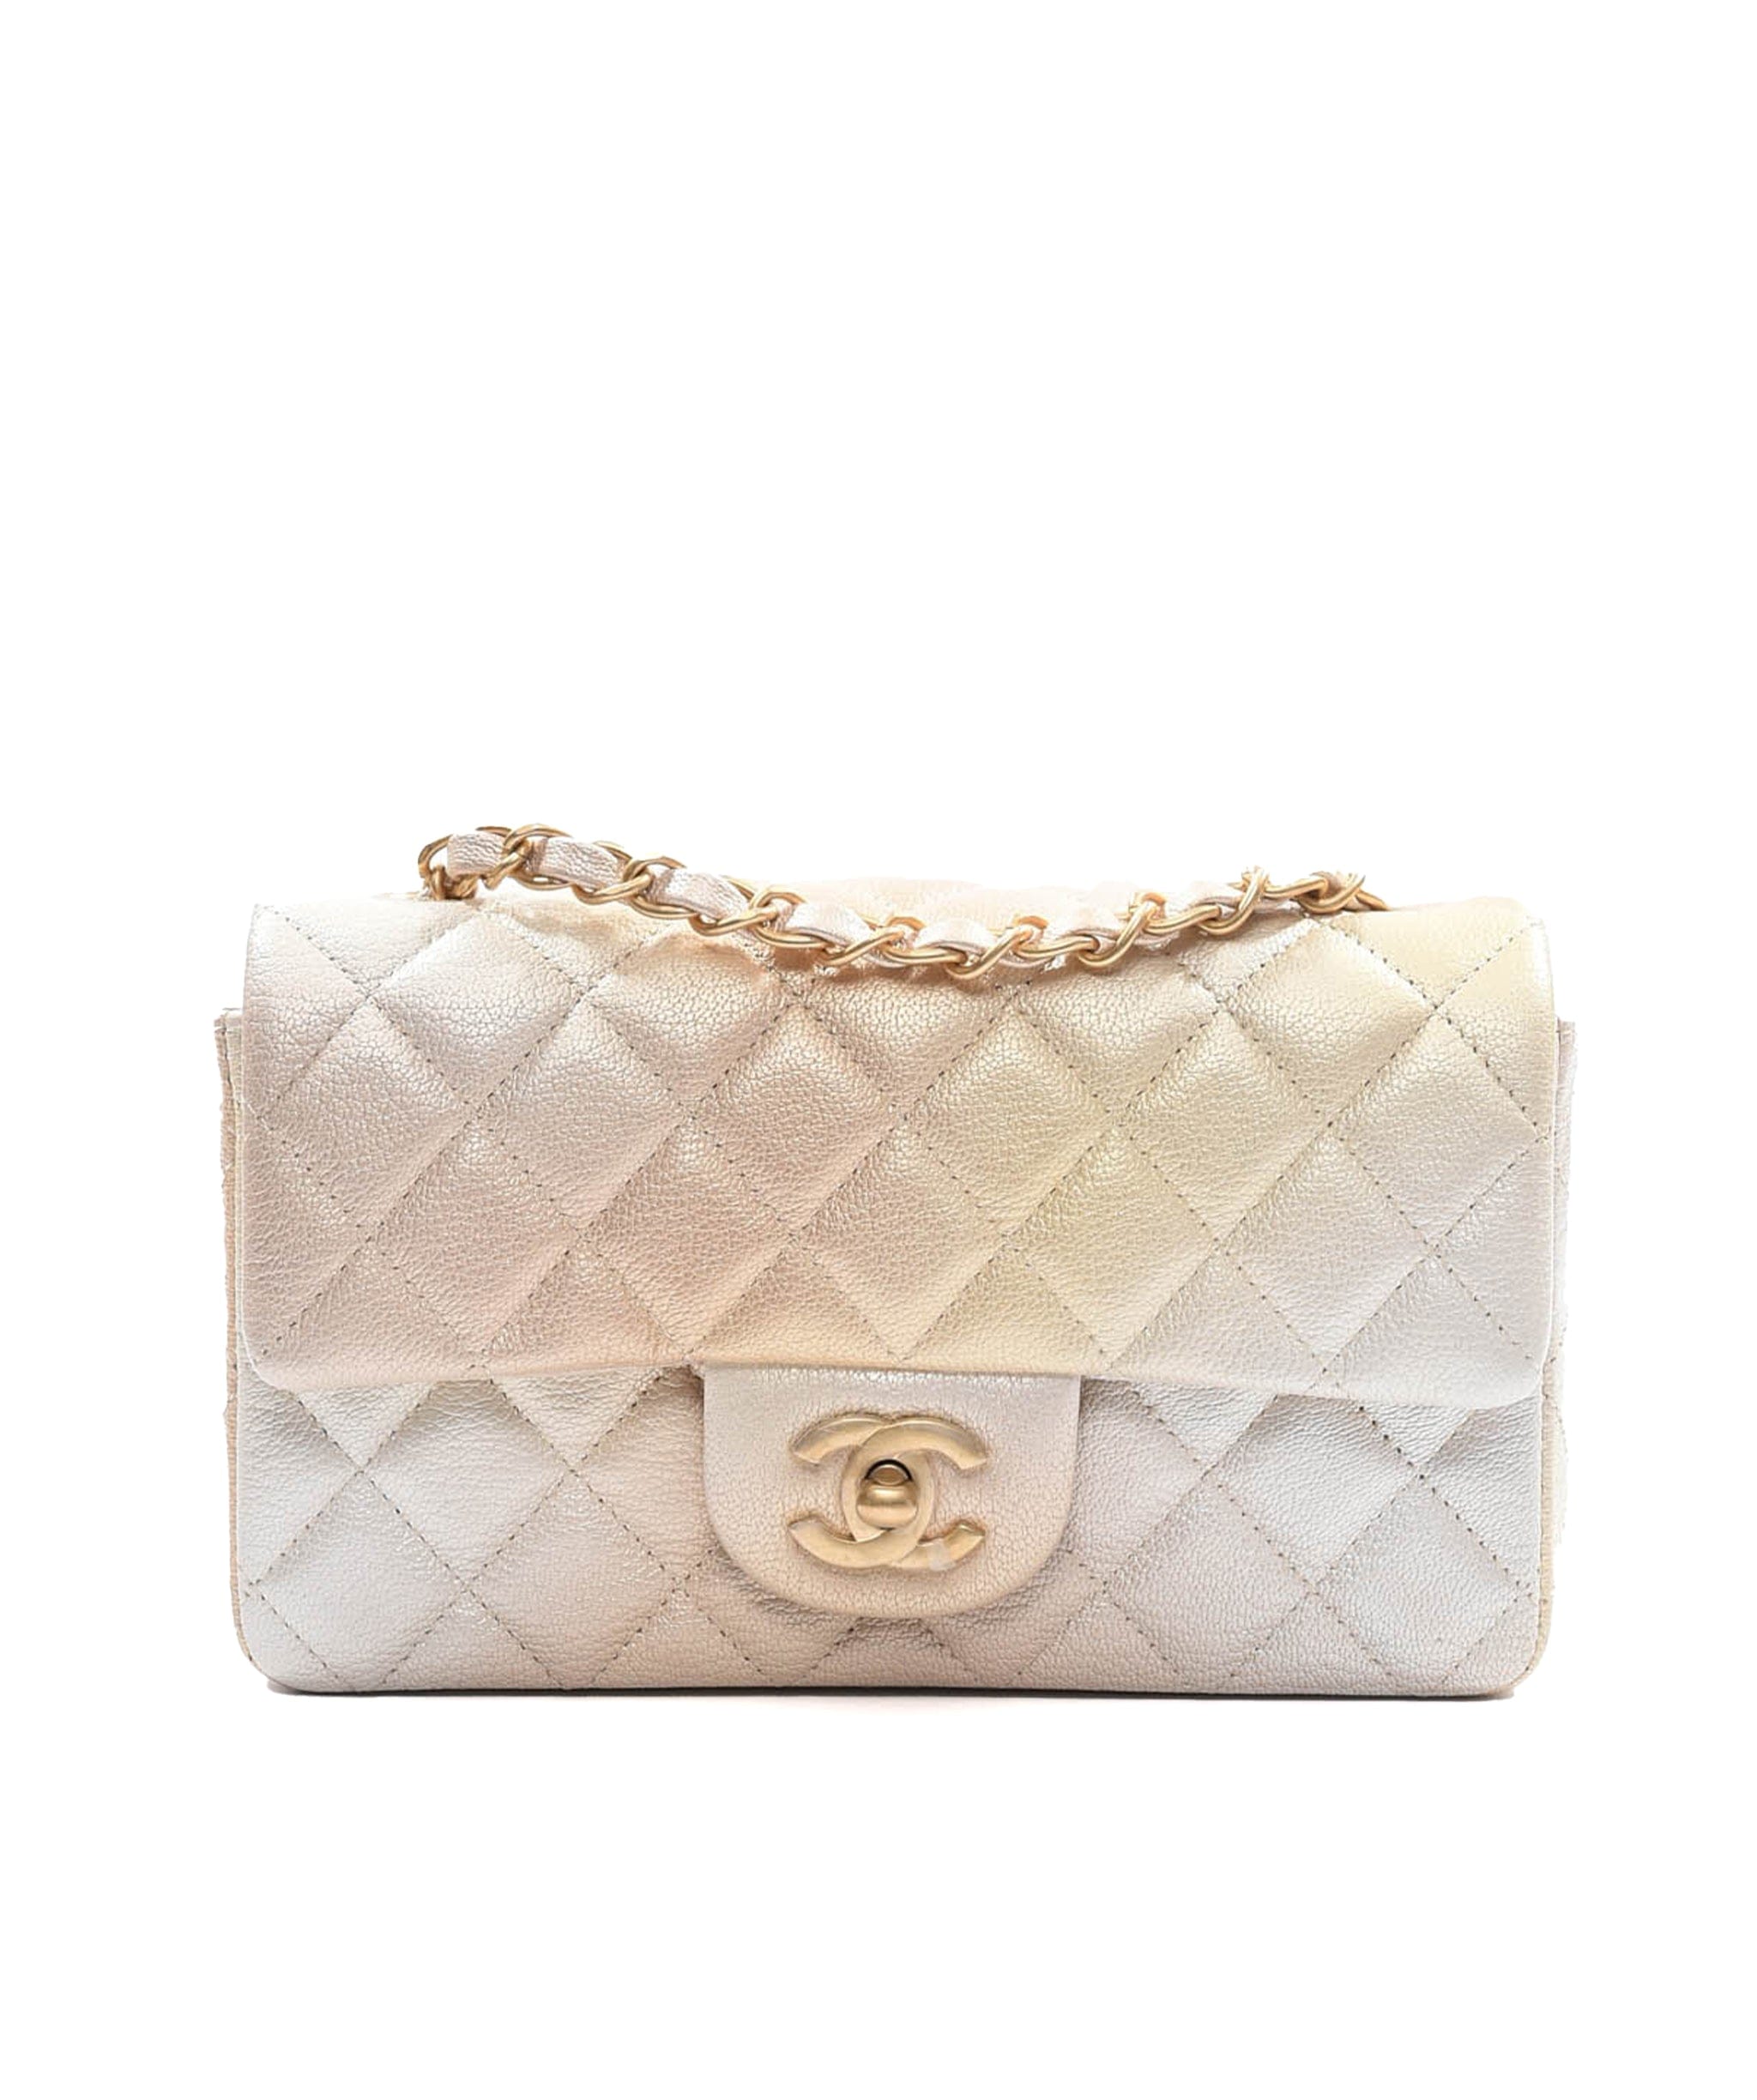 An in-depth look at Chanel classic sizes and prices, in particular the Chanel  mini flap bag. Th…